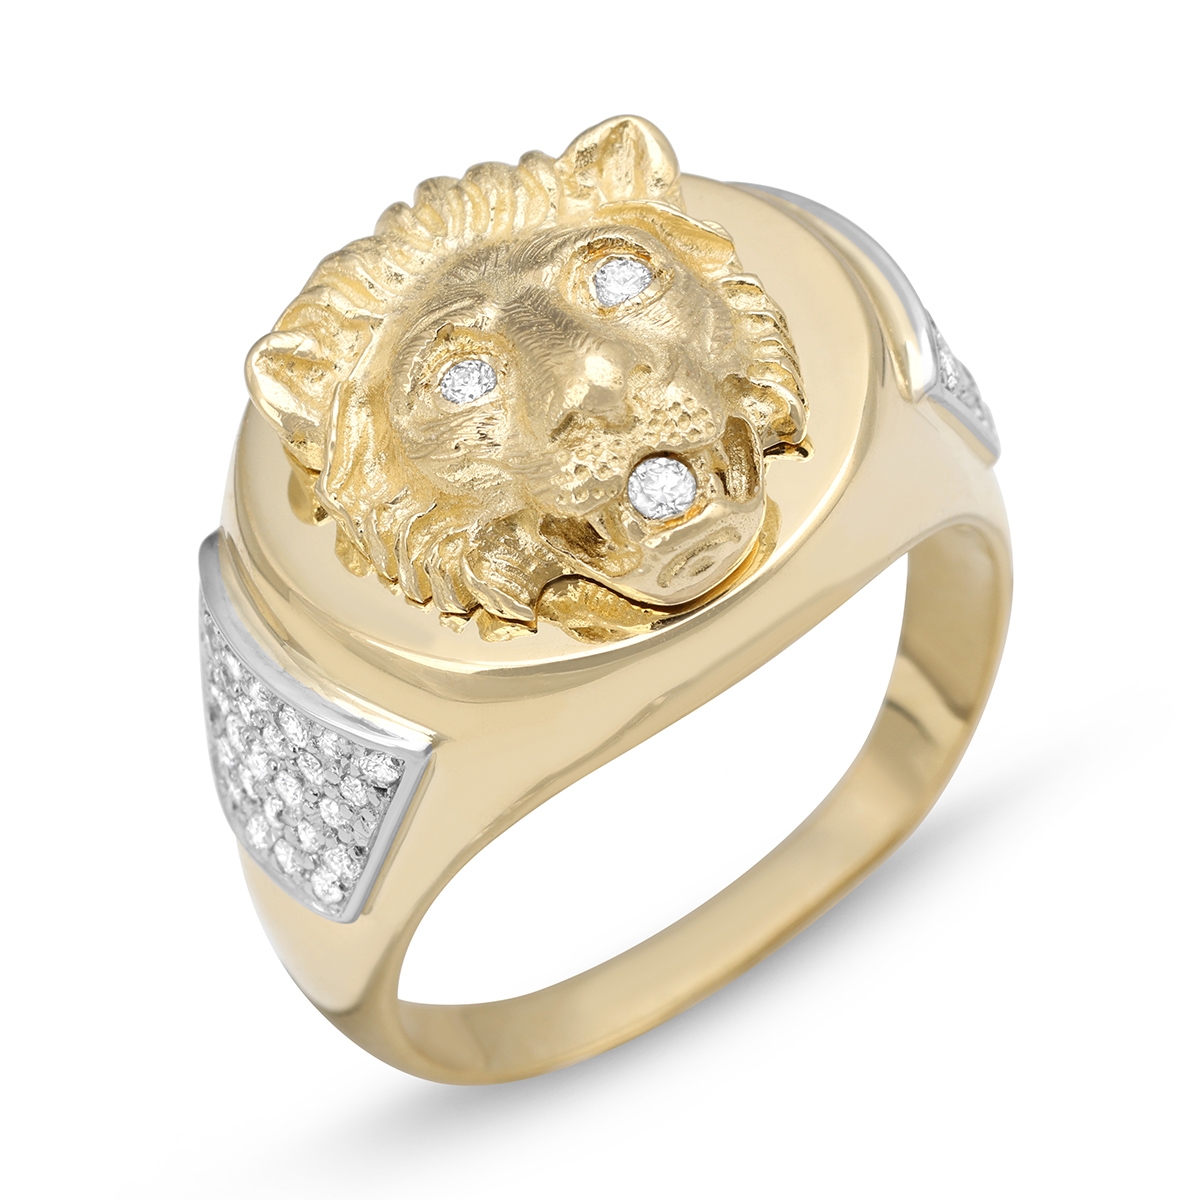 Majestic Lion of Judah 14K Gold Men's Ring With Diamond Accent, Jewelry |  Judaica Webstore